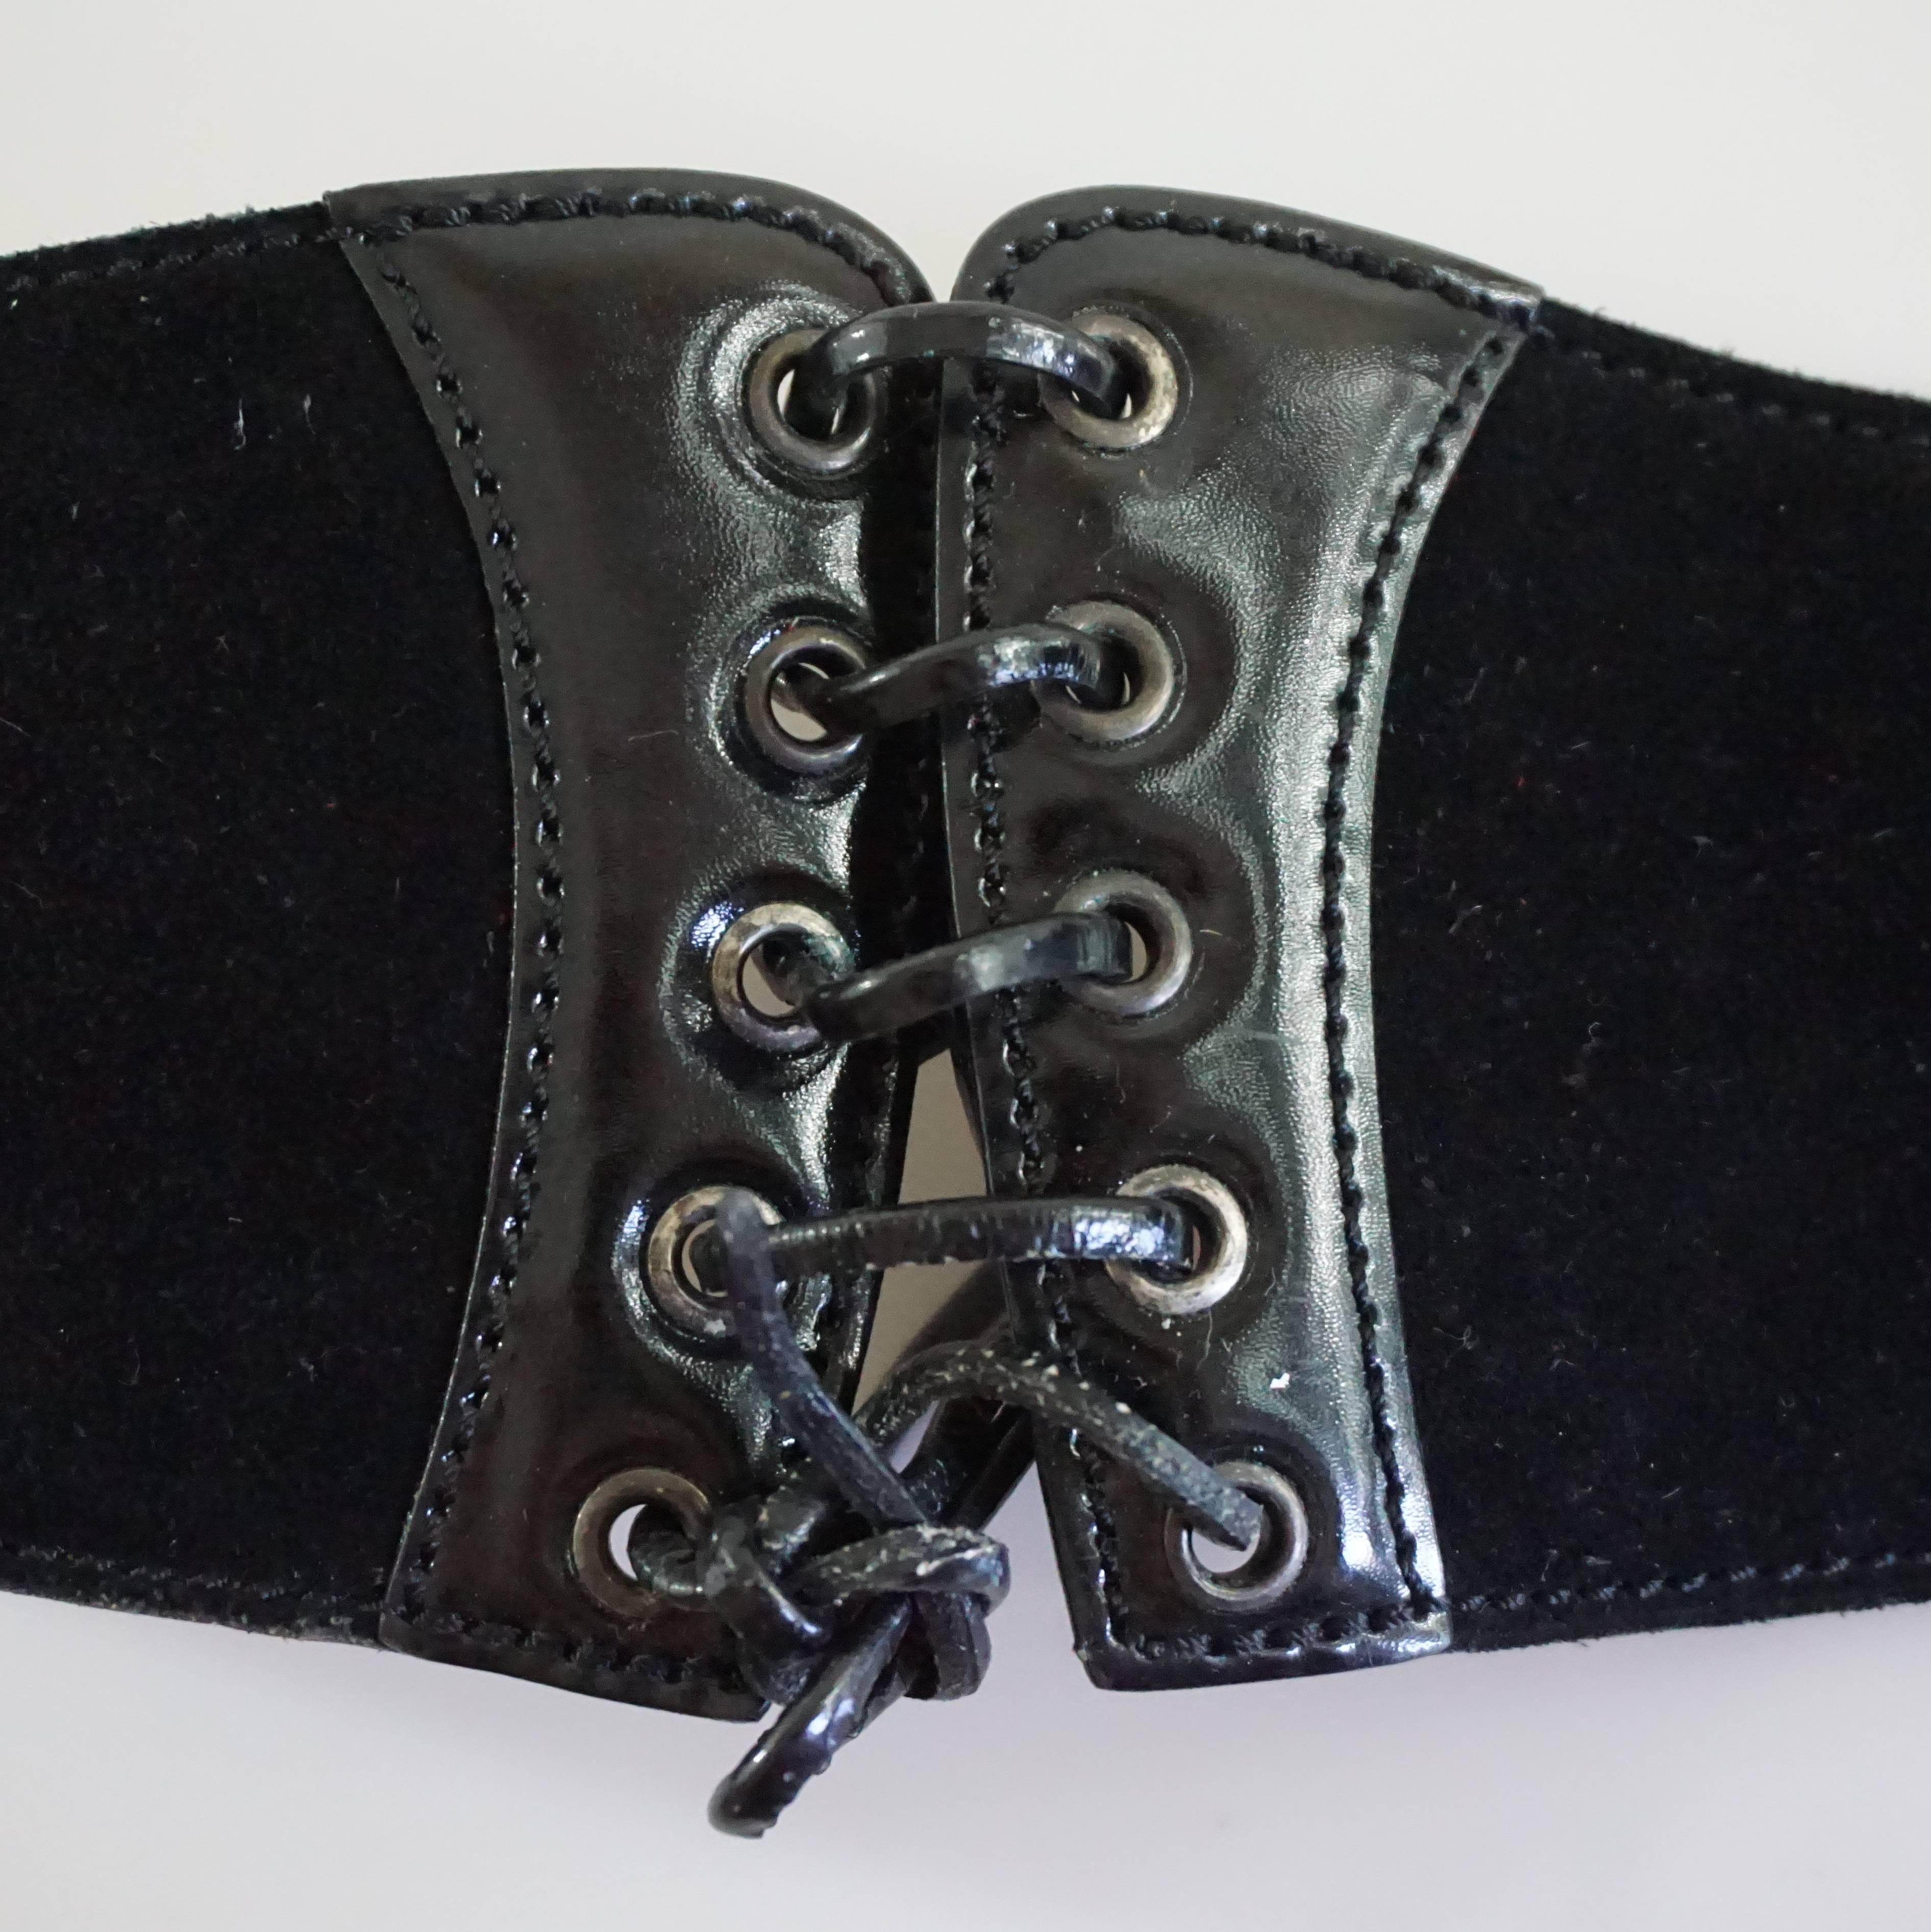 Alaia Black Suede and Patent Lace-Up Belt - 75 5